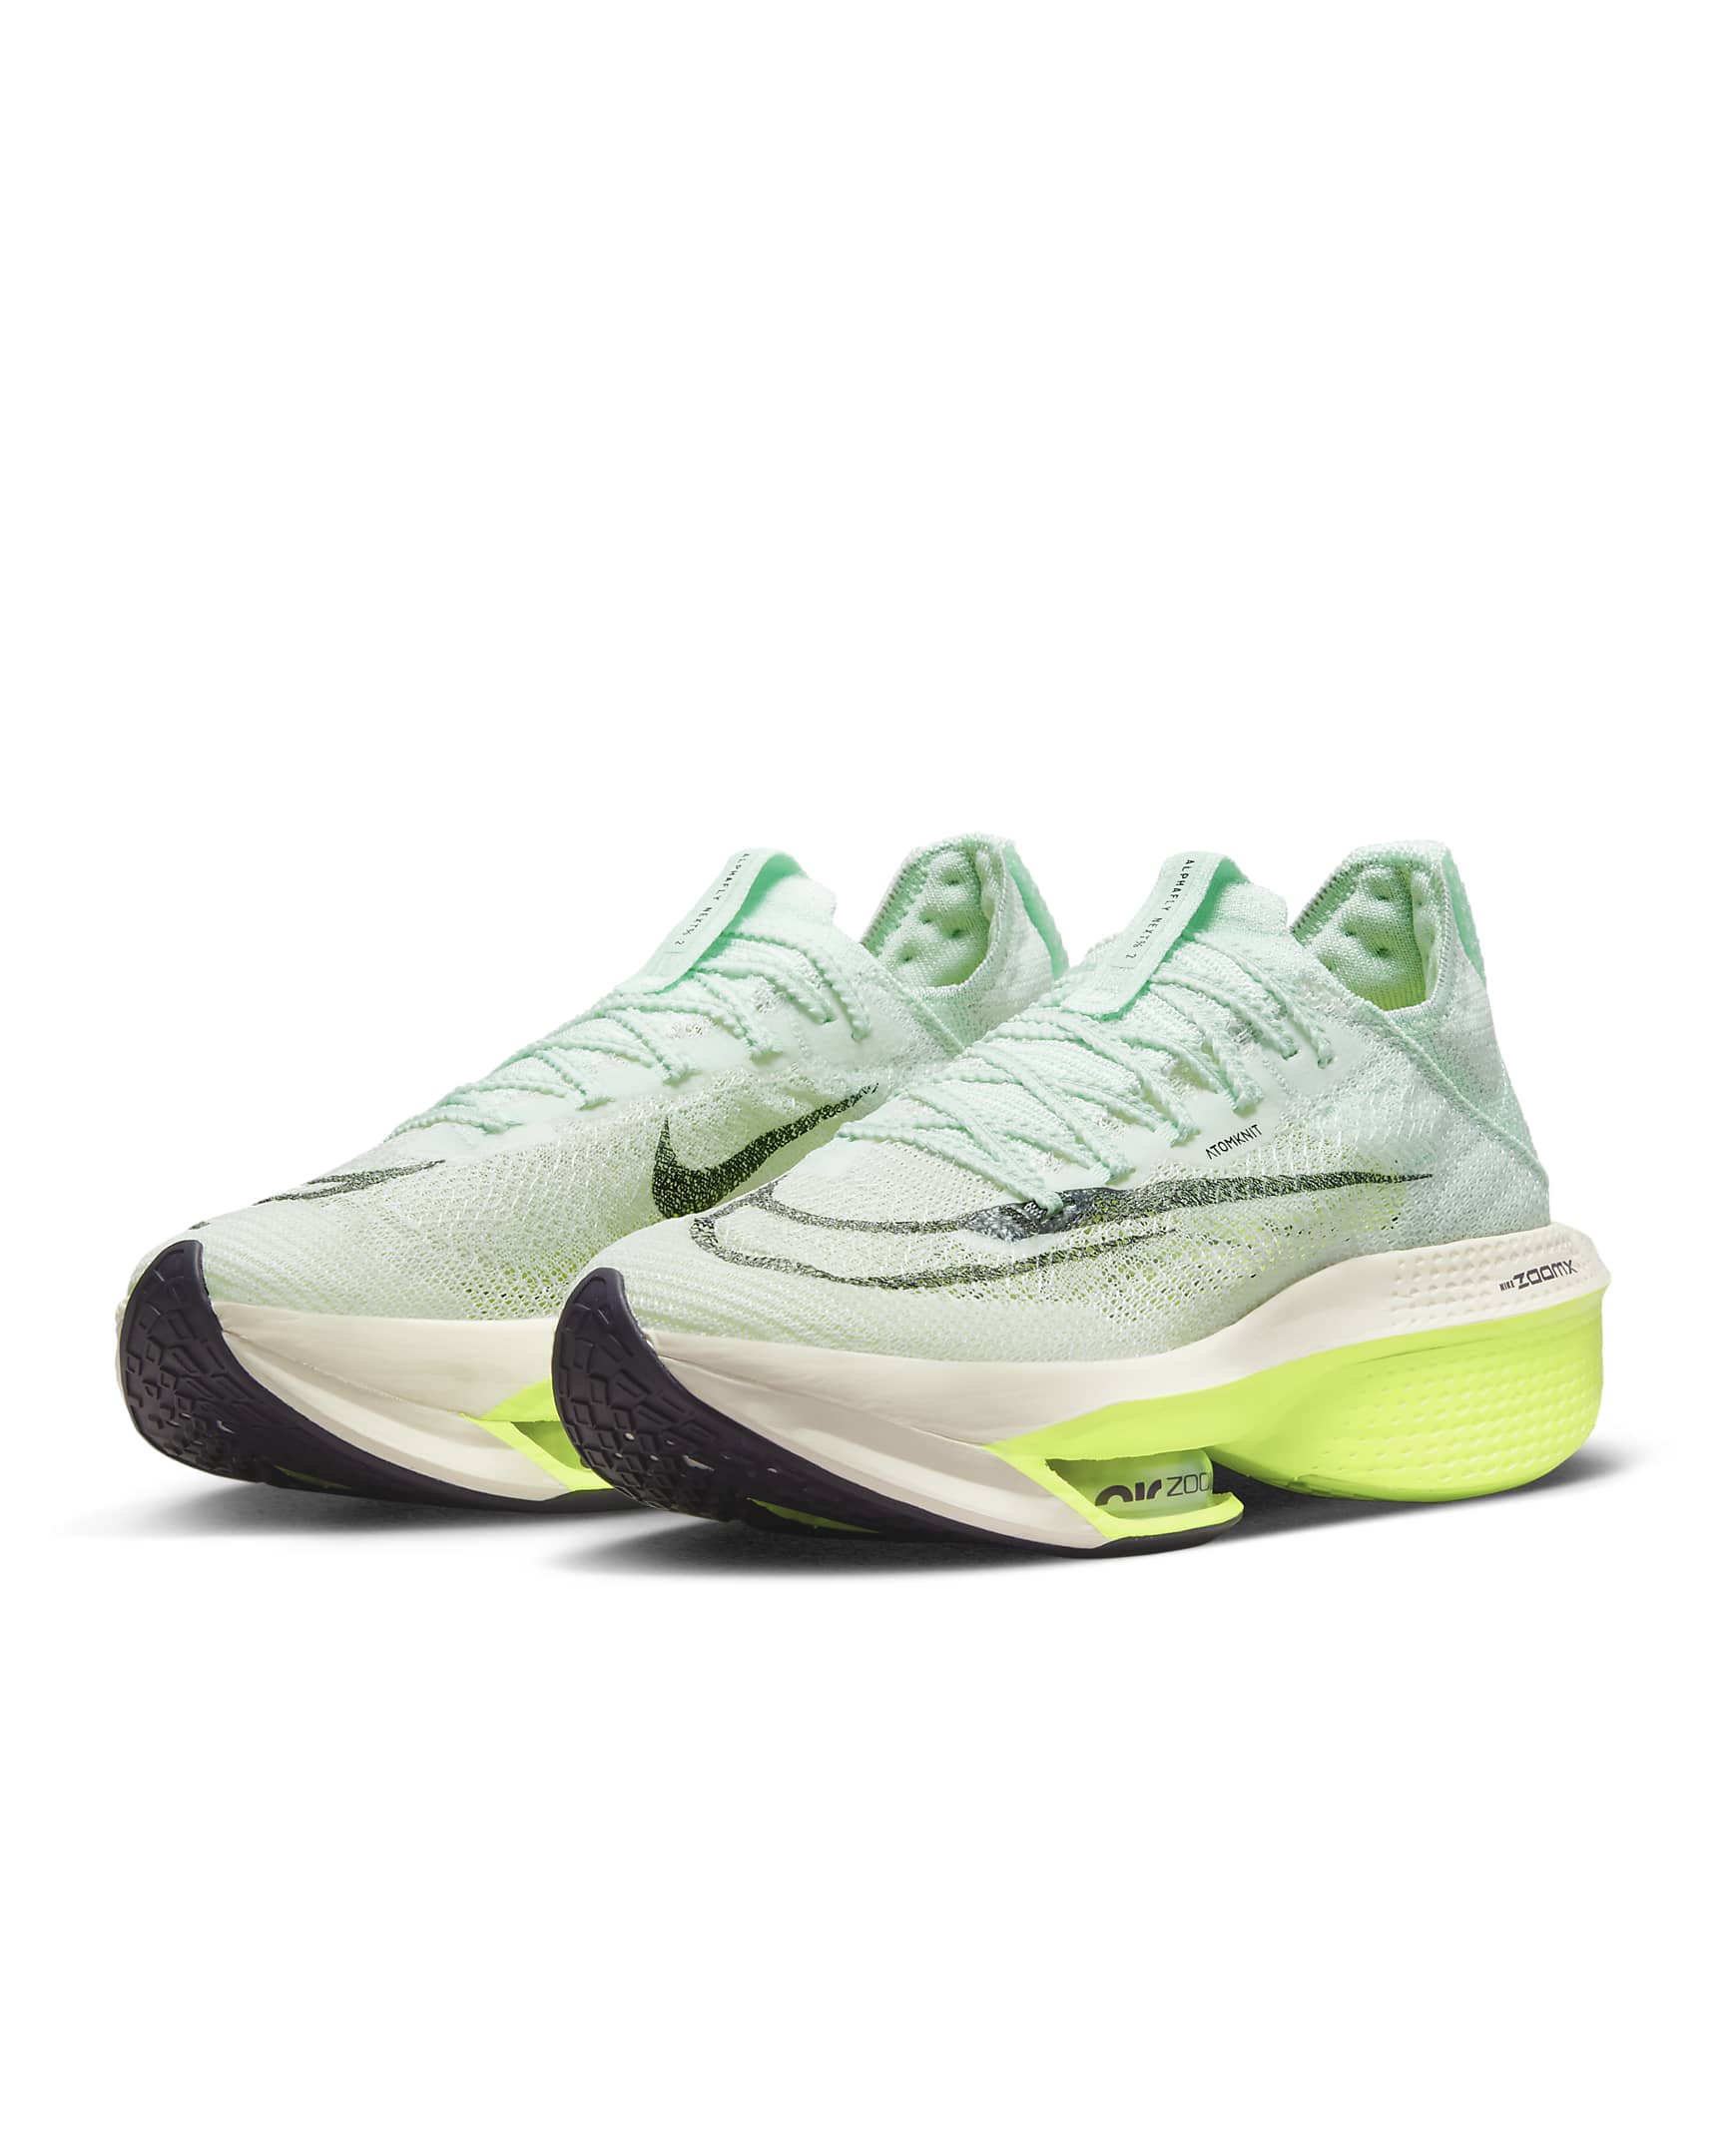 Air Zoom Alphafly NEXT% 2 | Nike | Playmakers